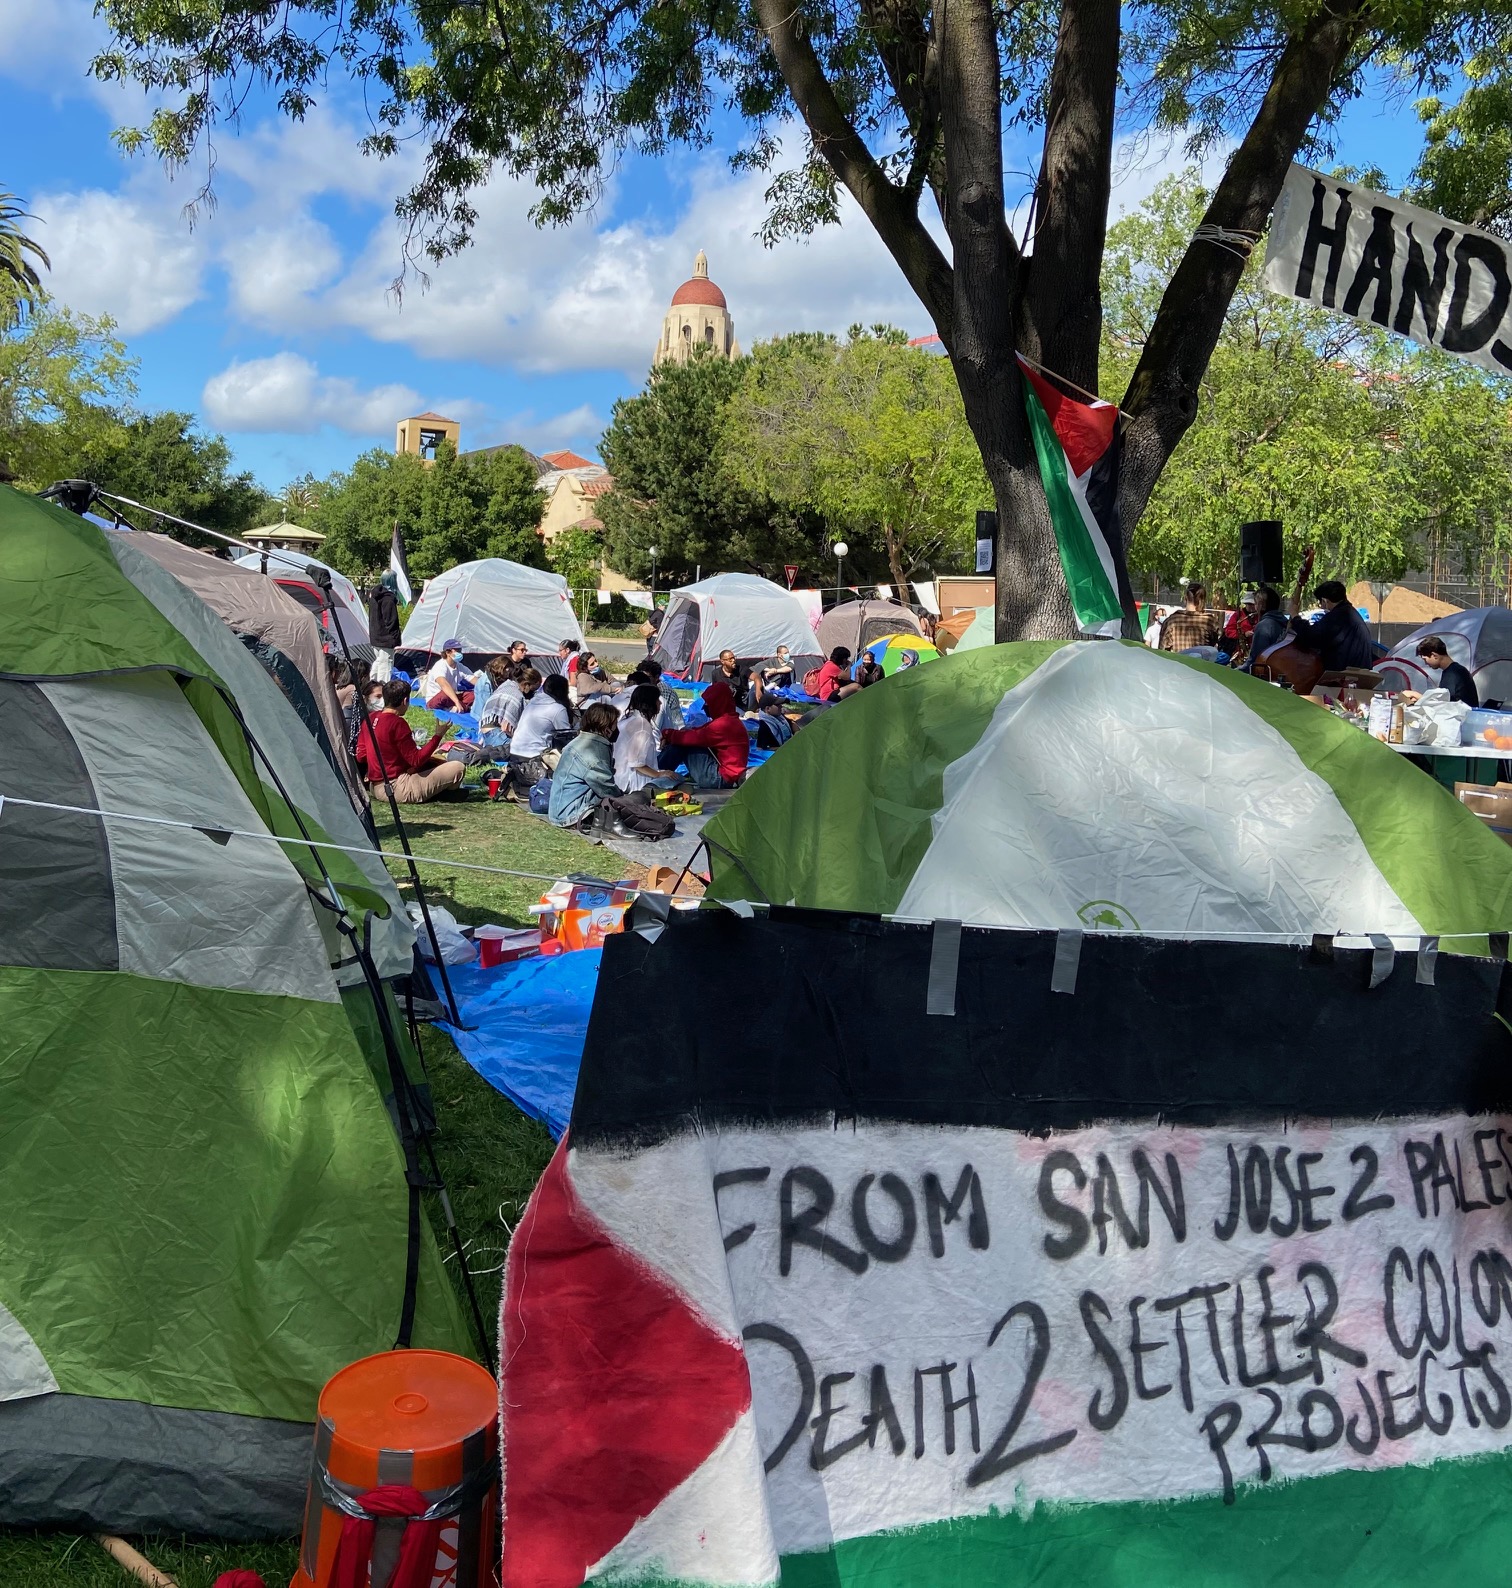 tents and banner "from San Jose: Stop Settler Colonization" 